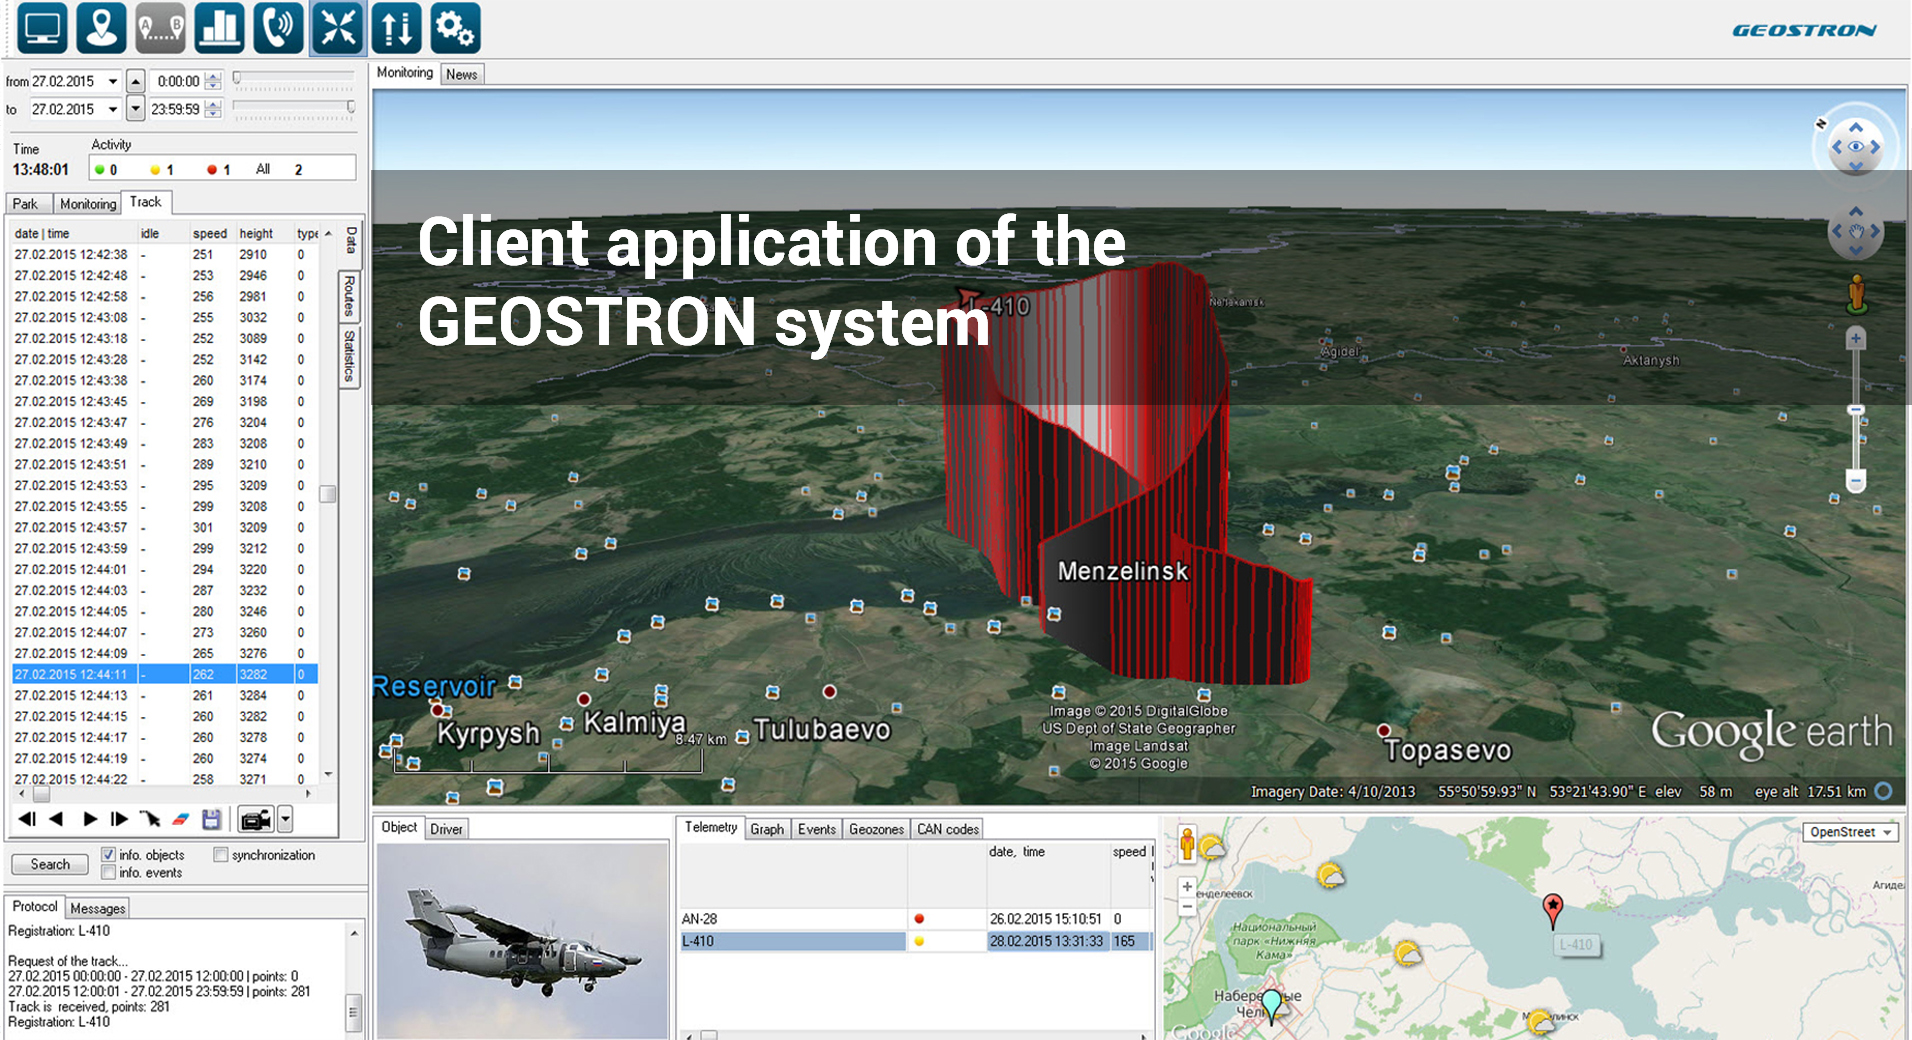 Client application of the GEOSTRON system